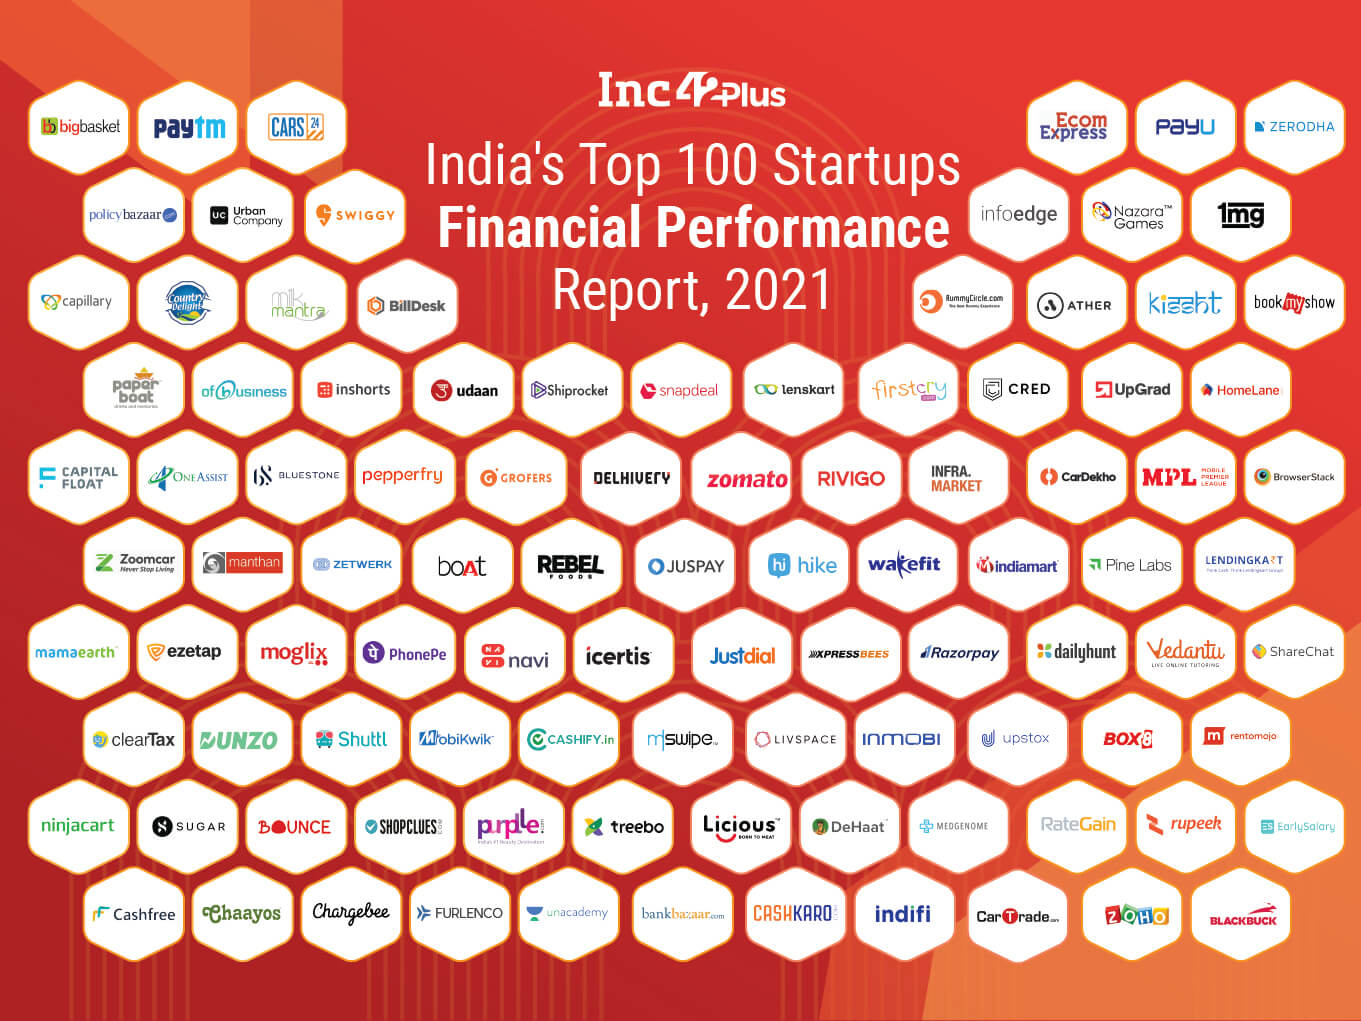 India's Top 100 Startups: Financial Performance Report, 2021